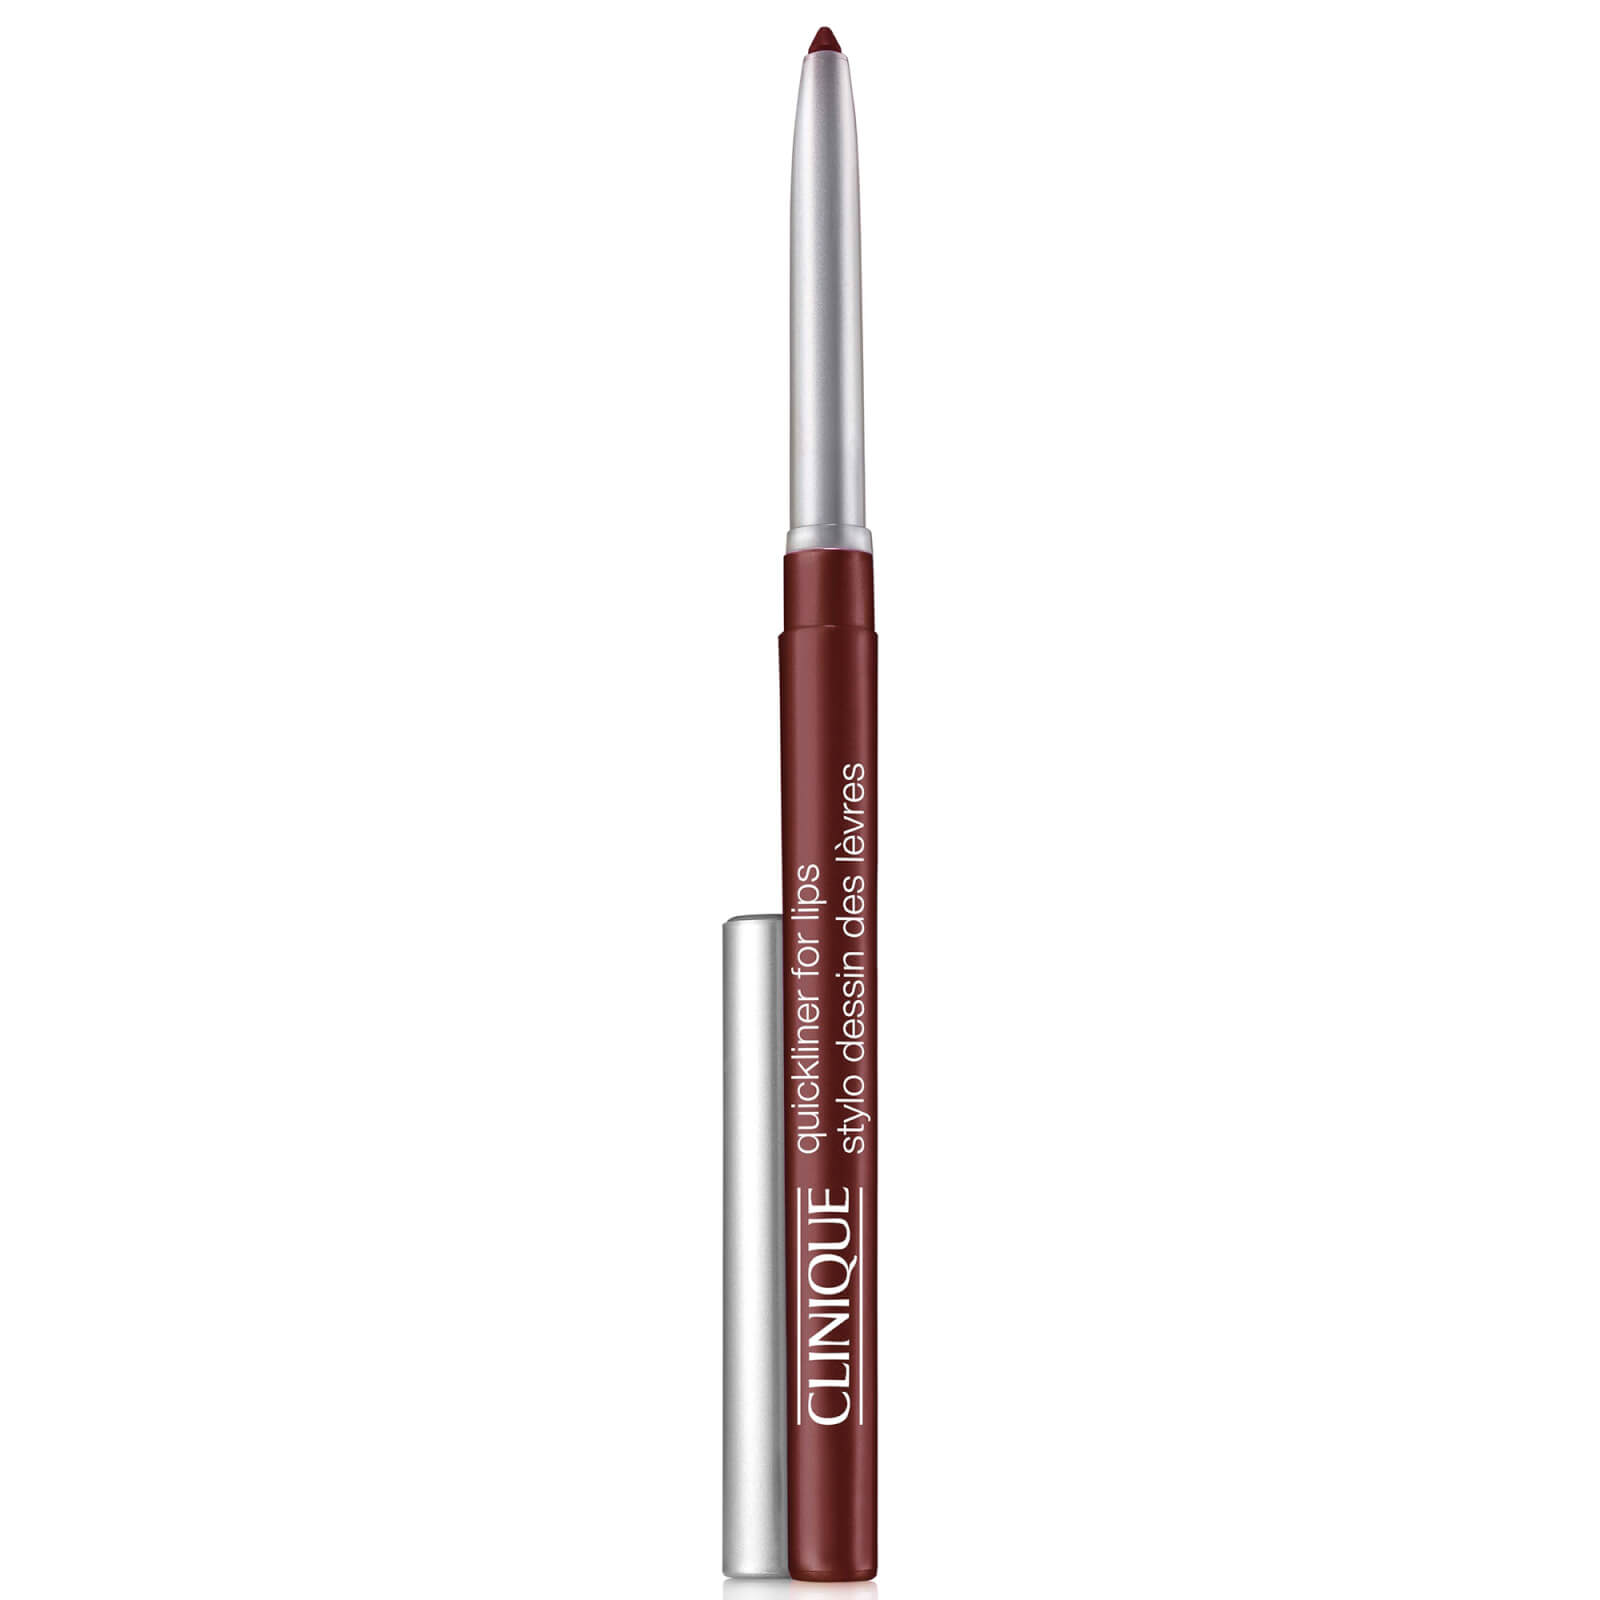 Photos - Lipstick & Lip Gloss Clinique Quickliner for Lips 0.3g  - Chocolate Chip V7HJ19 (Various Shades)